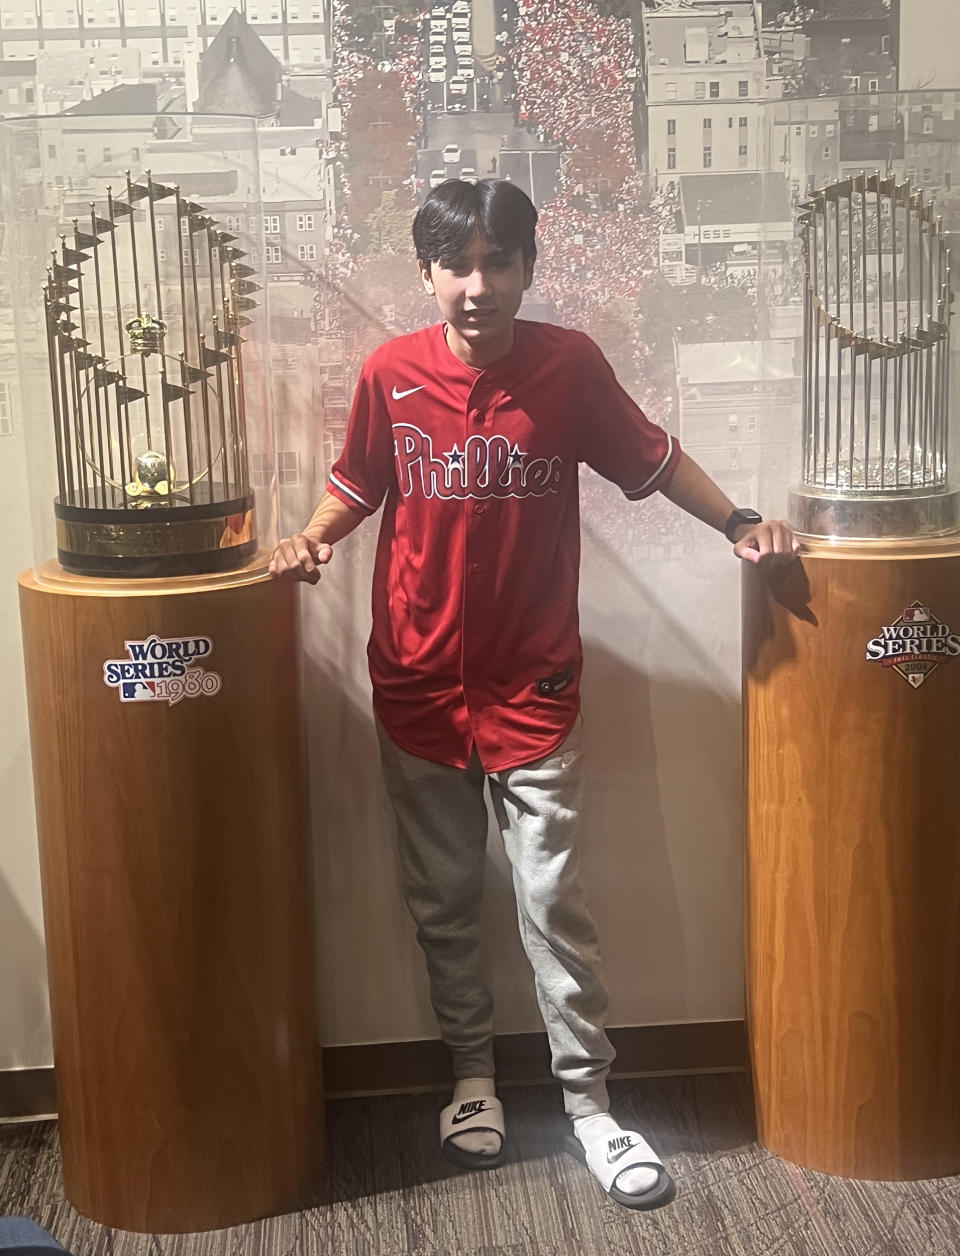 After the story of him going to a Phillies playoff game alone to honor his dad went viral, Cody Newton was able to attend two more playoff games, including the one the team clinched to earn a spot in the World Series. The team is 3-0 when Newton's in the stands. (Courtesy Cody Newton)